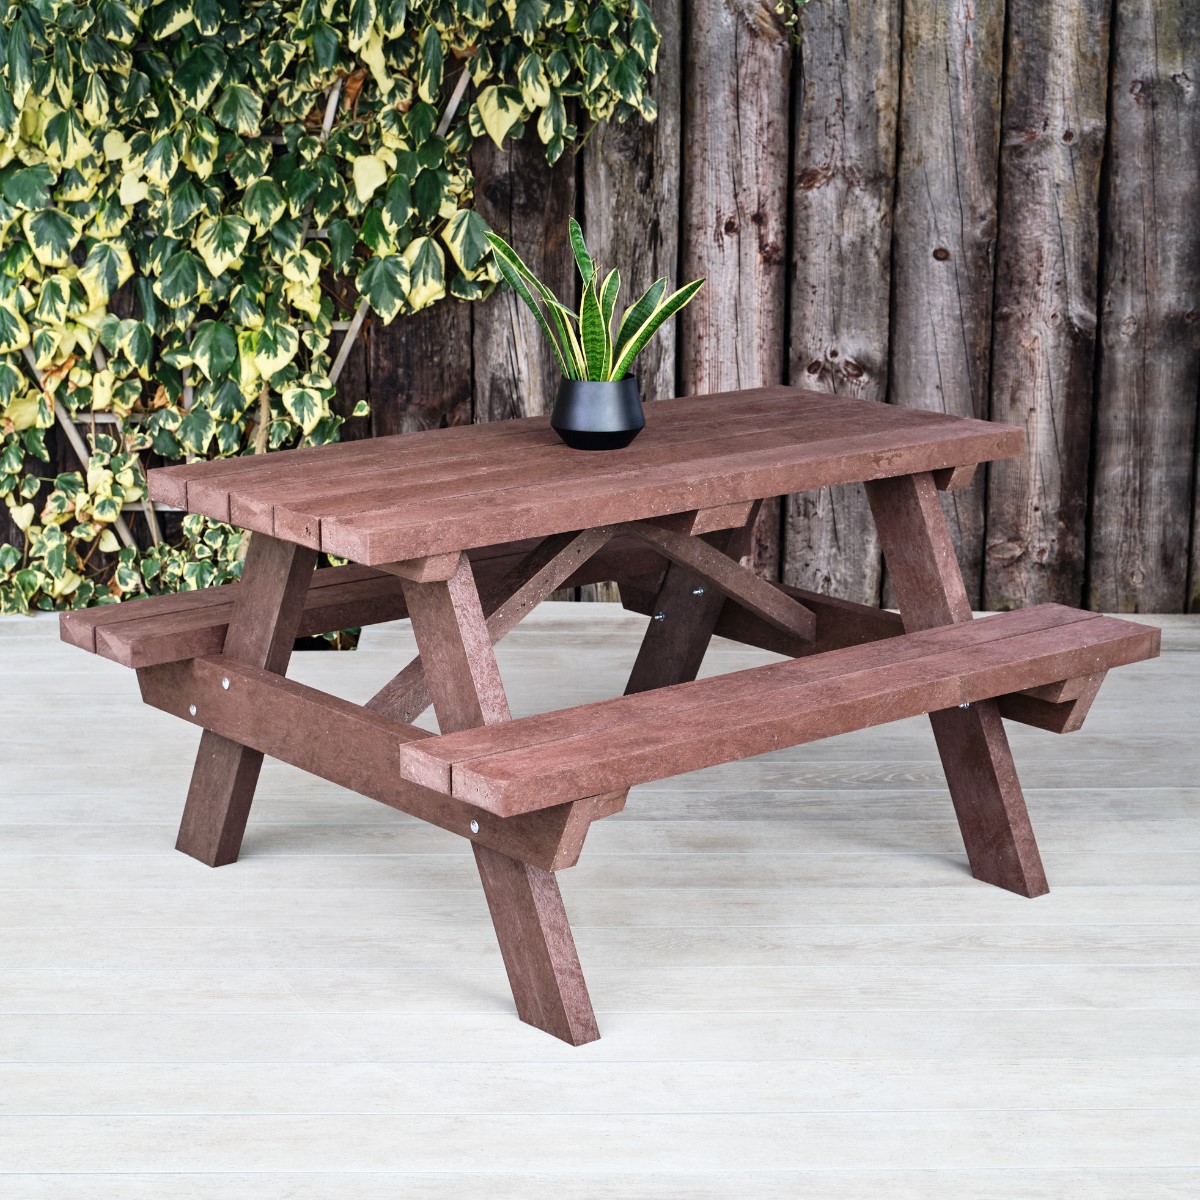 Greendine Recycled-Plastic-A-Frame-Picnic-Table